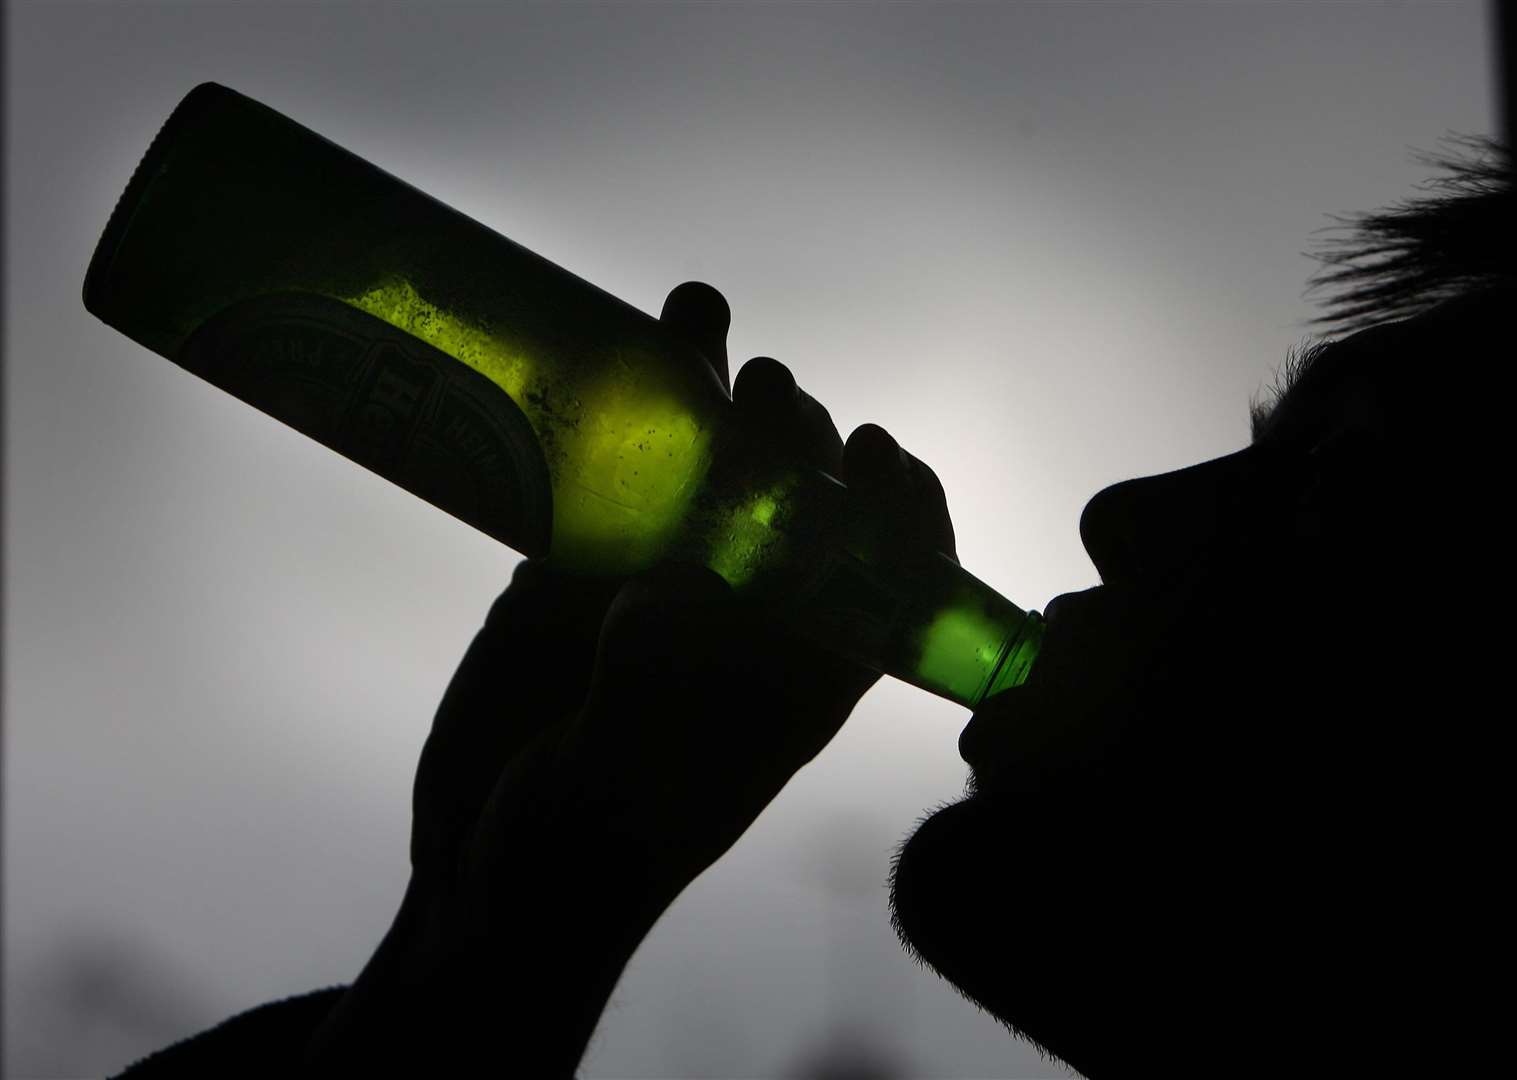 Drinking alcohol, being overweight and other known risk factors were responsible for nearly 4.45 million cancer deaths around the world in 2019 (David Jones/PA)